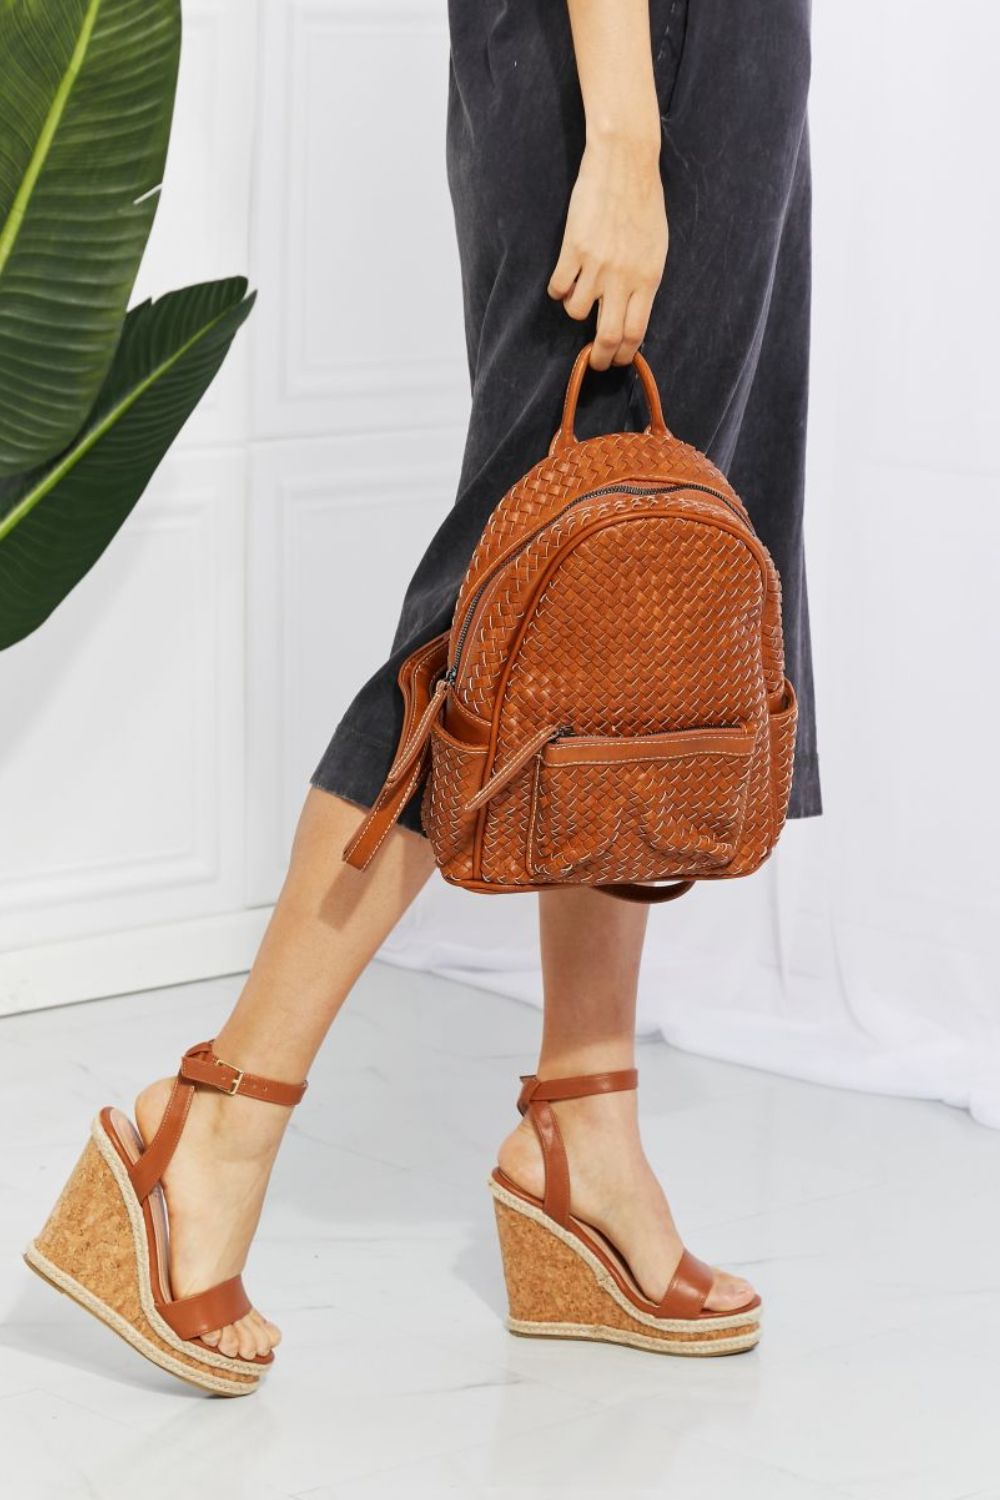 SHOMICO Certainly Chic Faux Leather Woven Backpack - Tigbul's Fashion